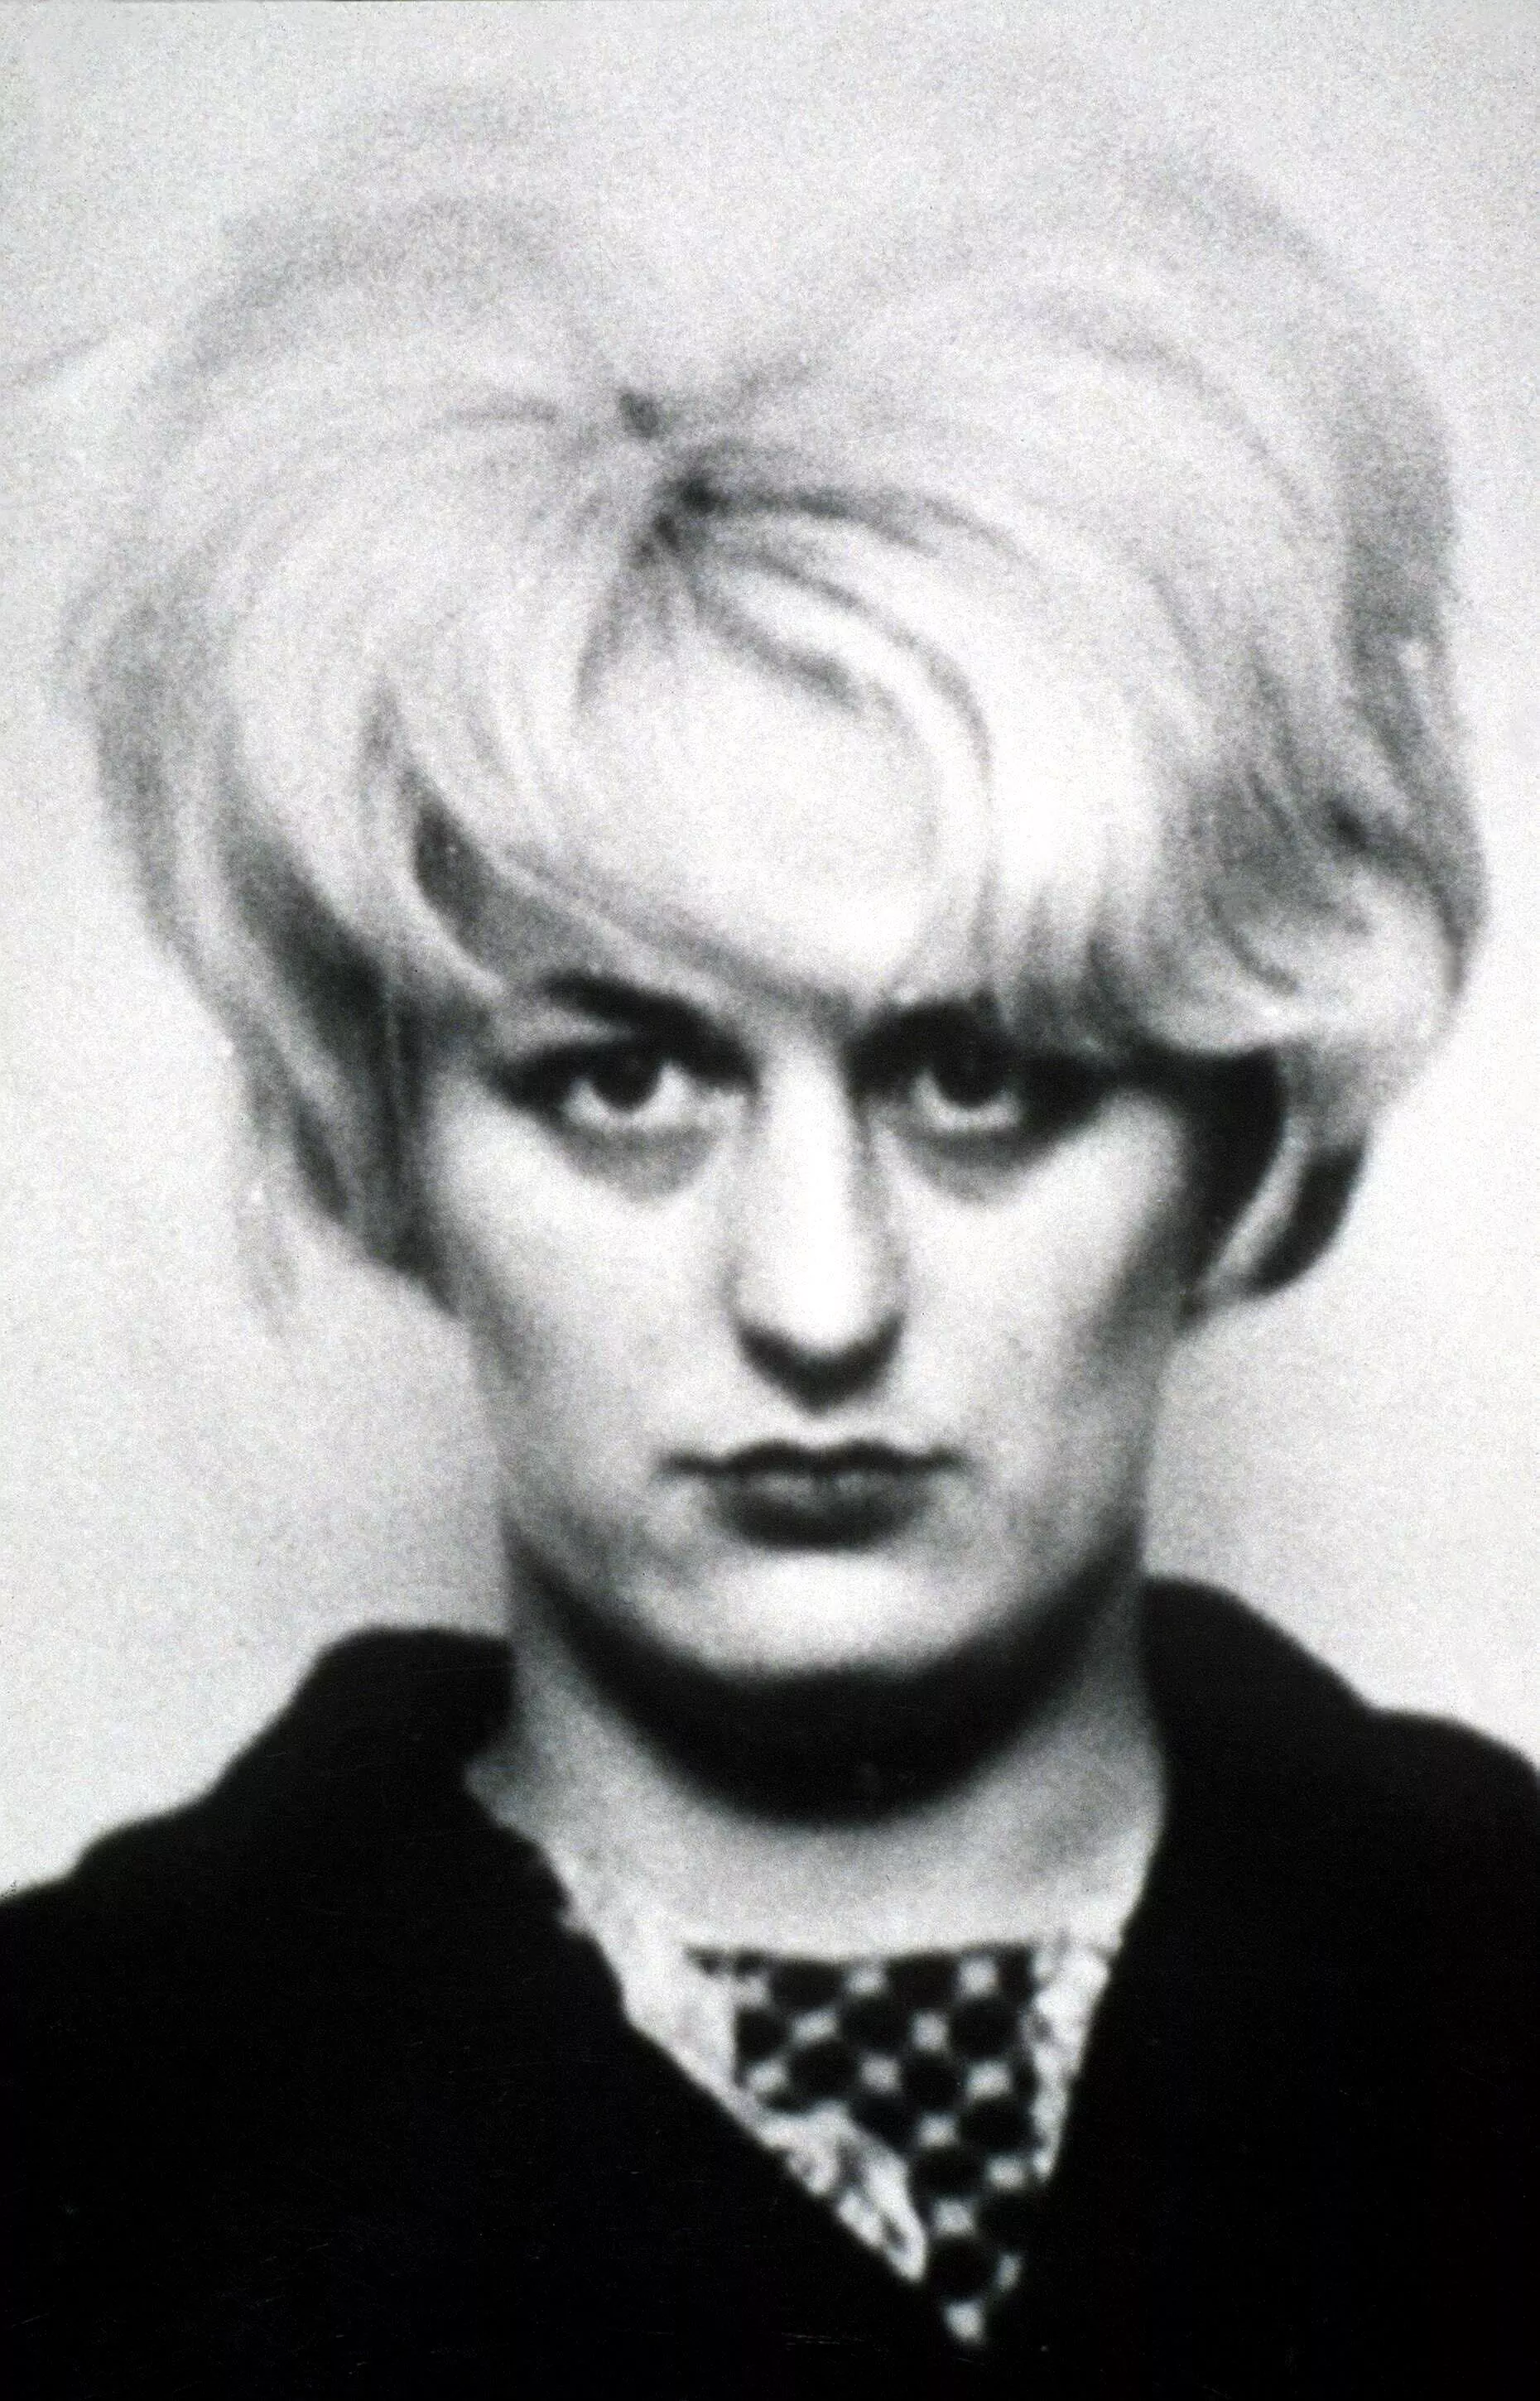 Myra Hindley was famed for being one of the UK's most evil women (